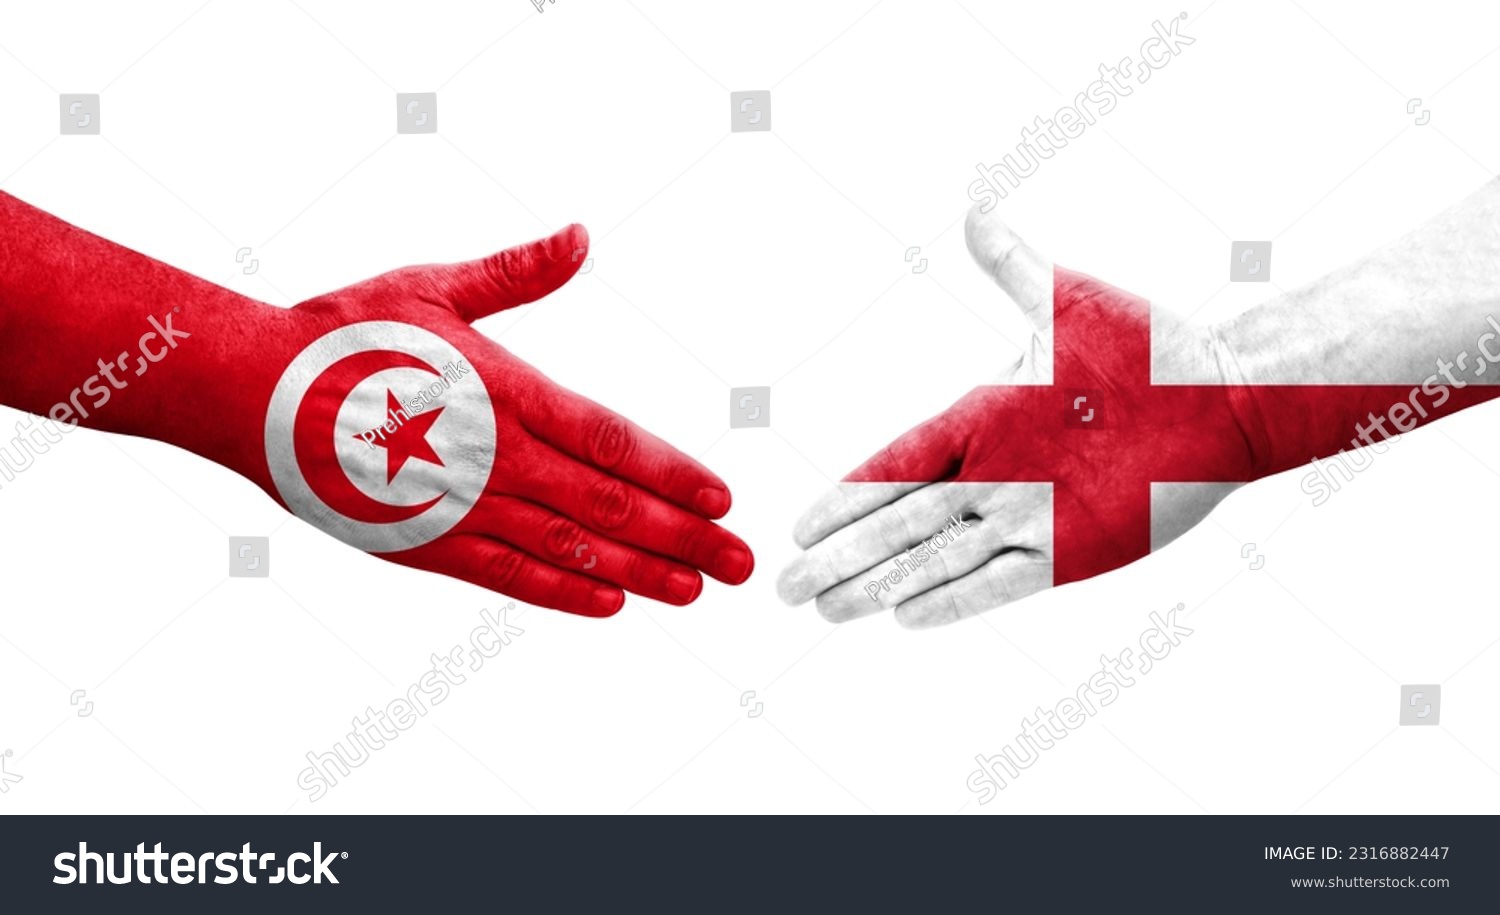 Handshake between England and Tunisia flags painted on hands, isolated transparent image. #2316882447